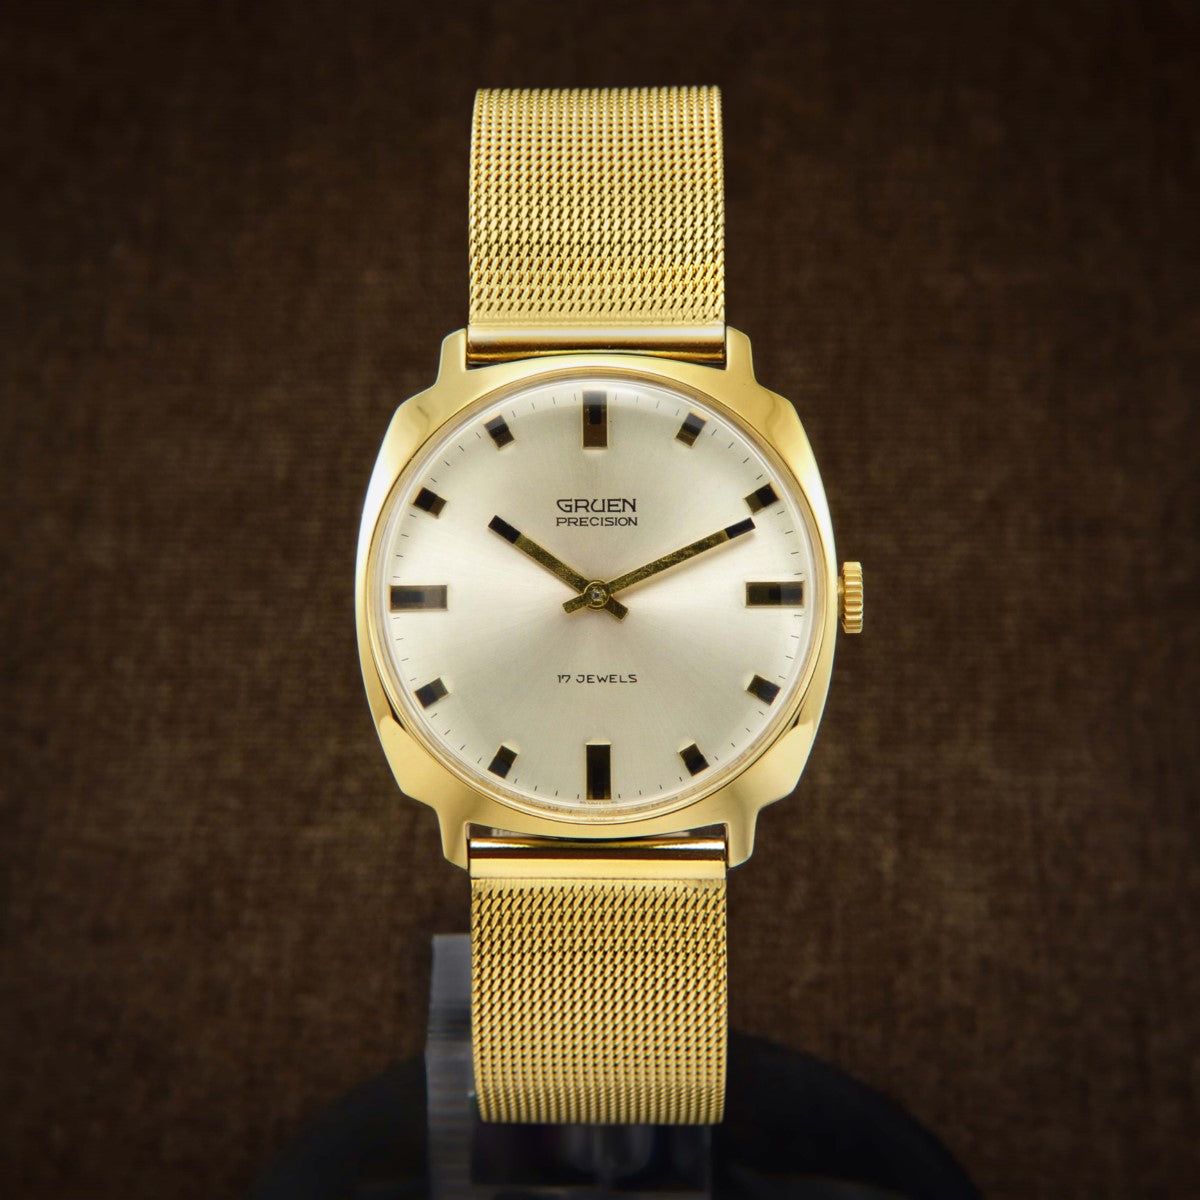 Gruen Precision Swiss Mens Watch From 1960s – Neo Classic Watches